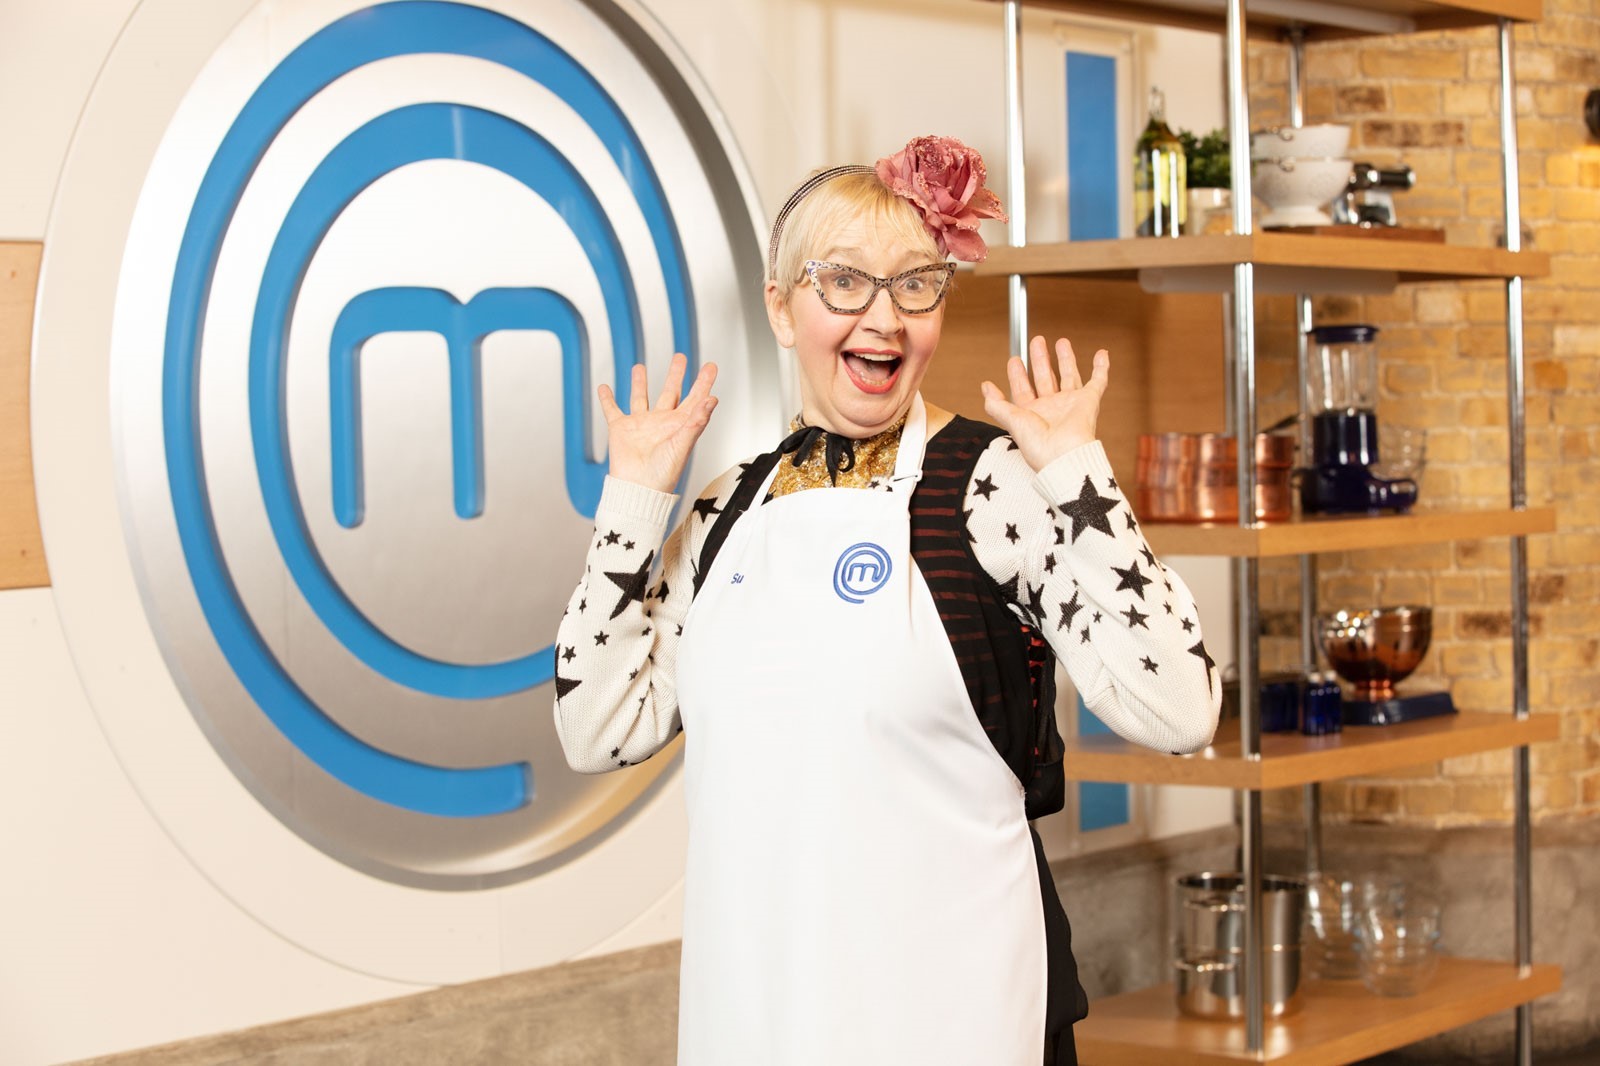 Challenge - Su Pollard was one of the contestants in the 2021 celebrity edition of MasterChef